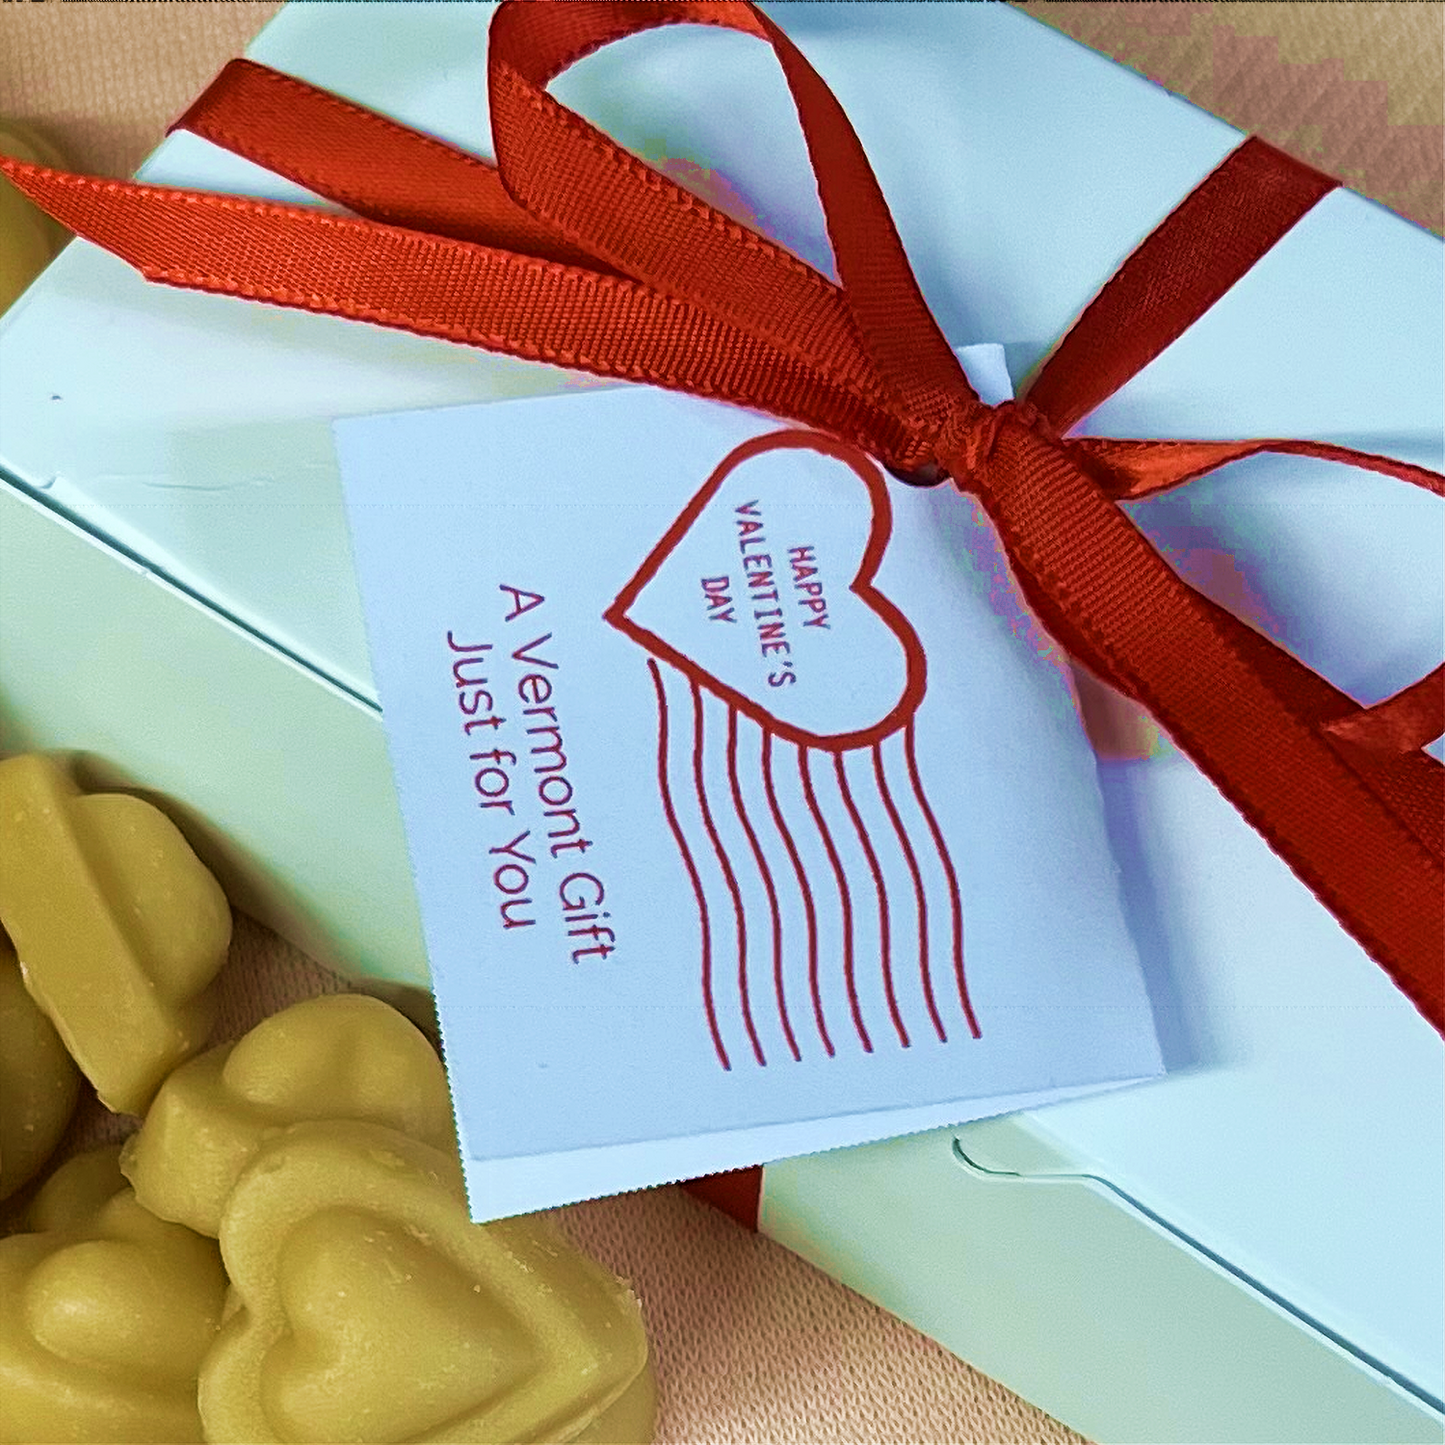 Vermont Maple Candy - You're So Sweet! Gift Box